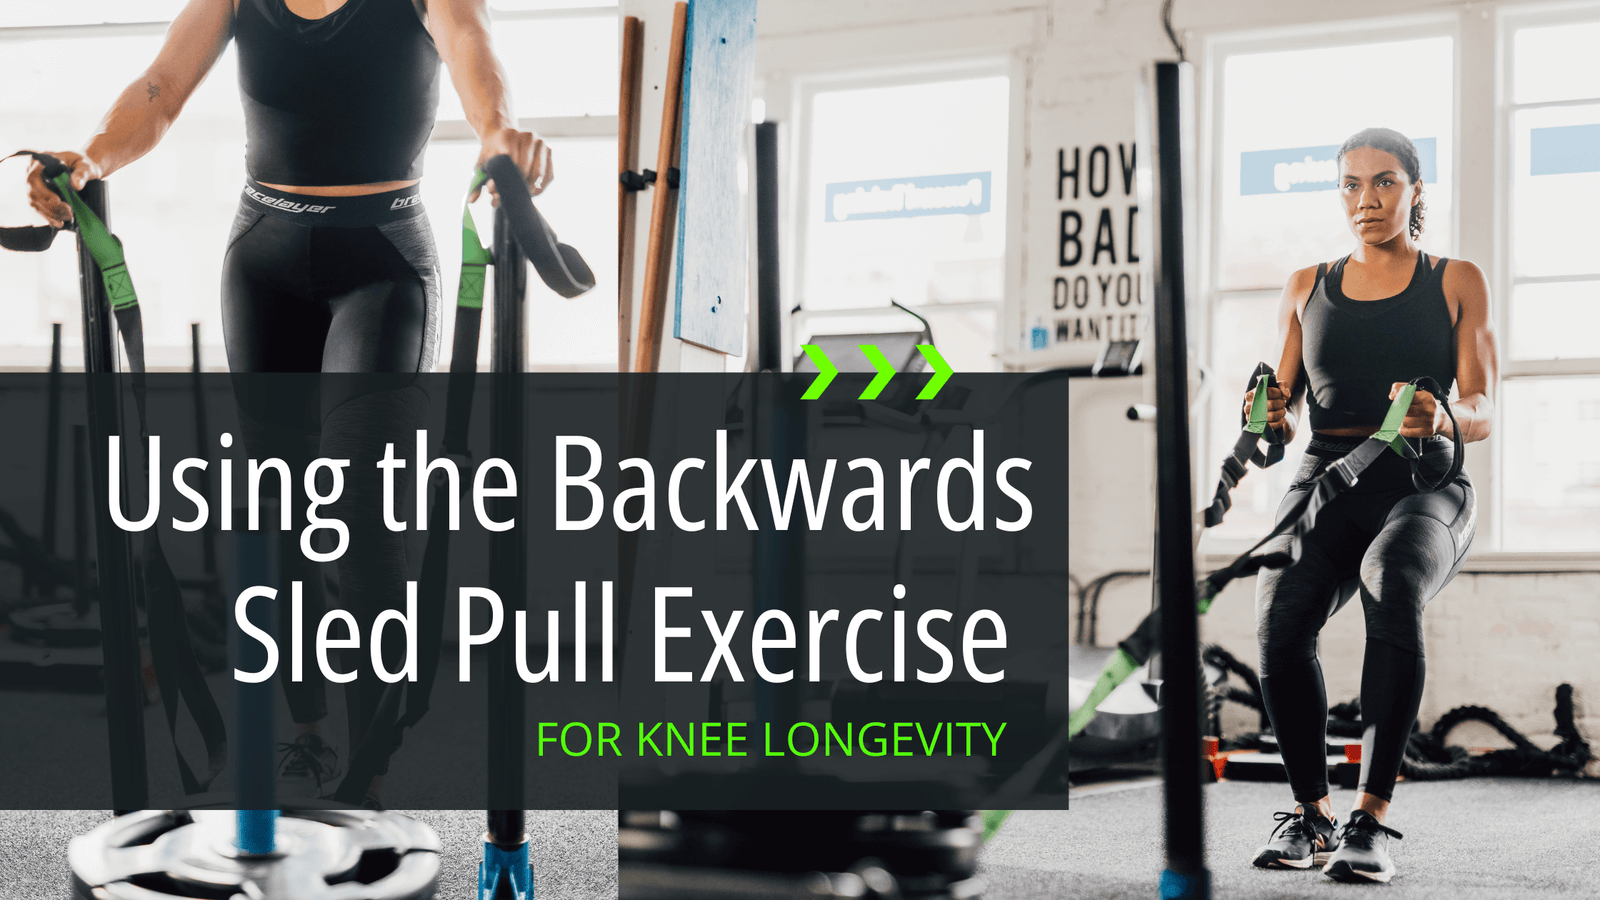 Blog banner for "Backwards Sled Pull for Knee Longevity" on Bracelayer® Canada | Knee Compression Gear, sled pull muscles worked, sled pulls muscles work, strengthing knees, backward knees, how to build knee strength, knee pulls